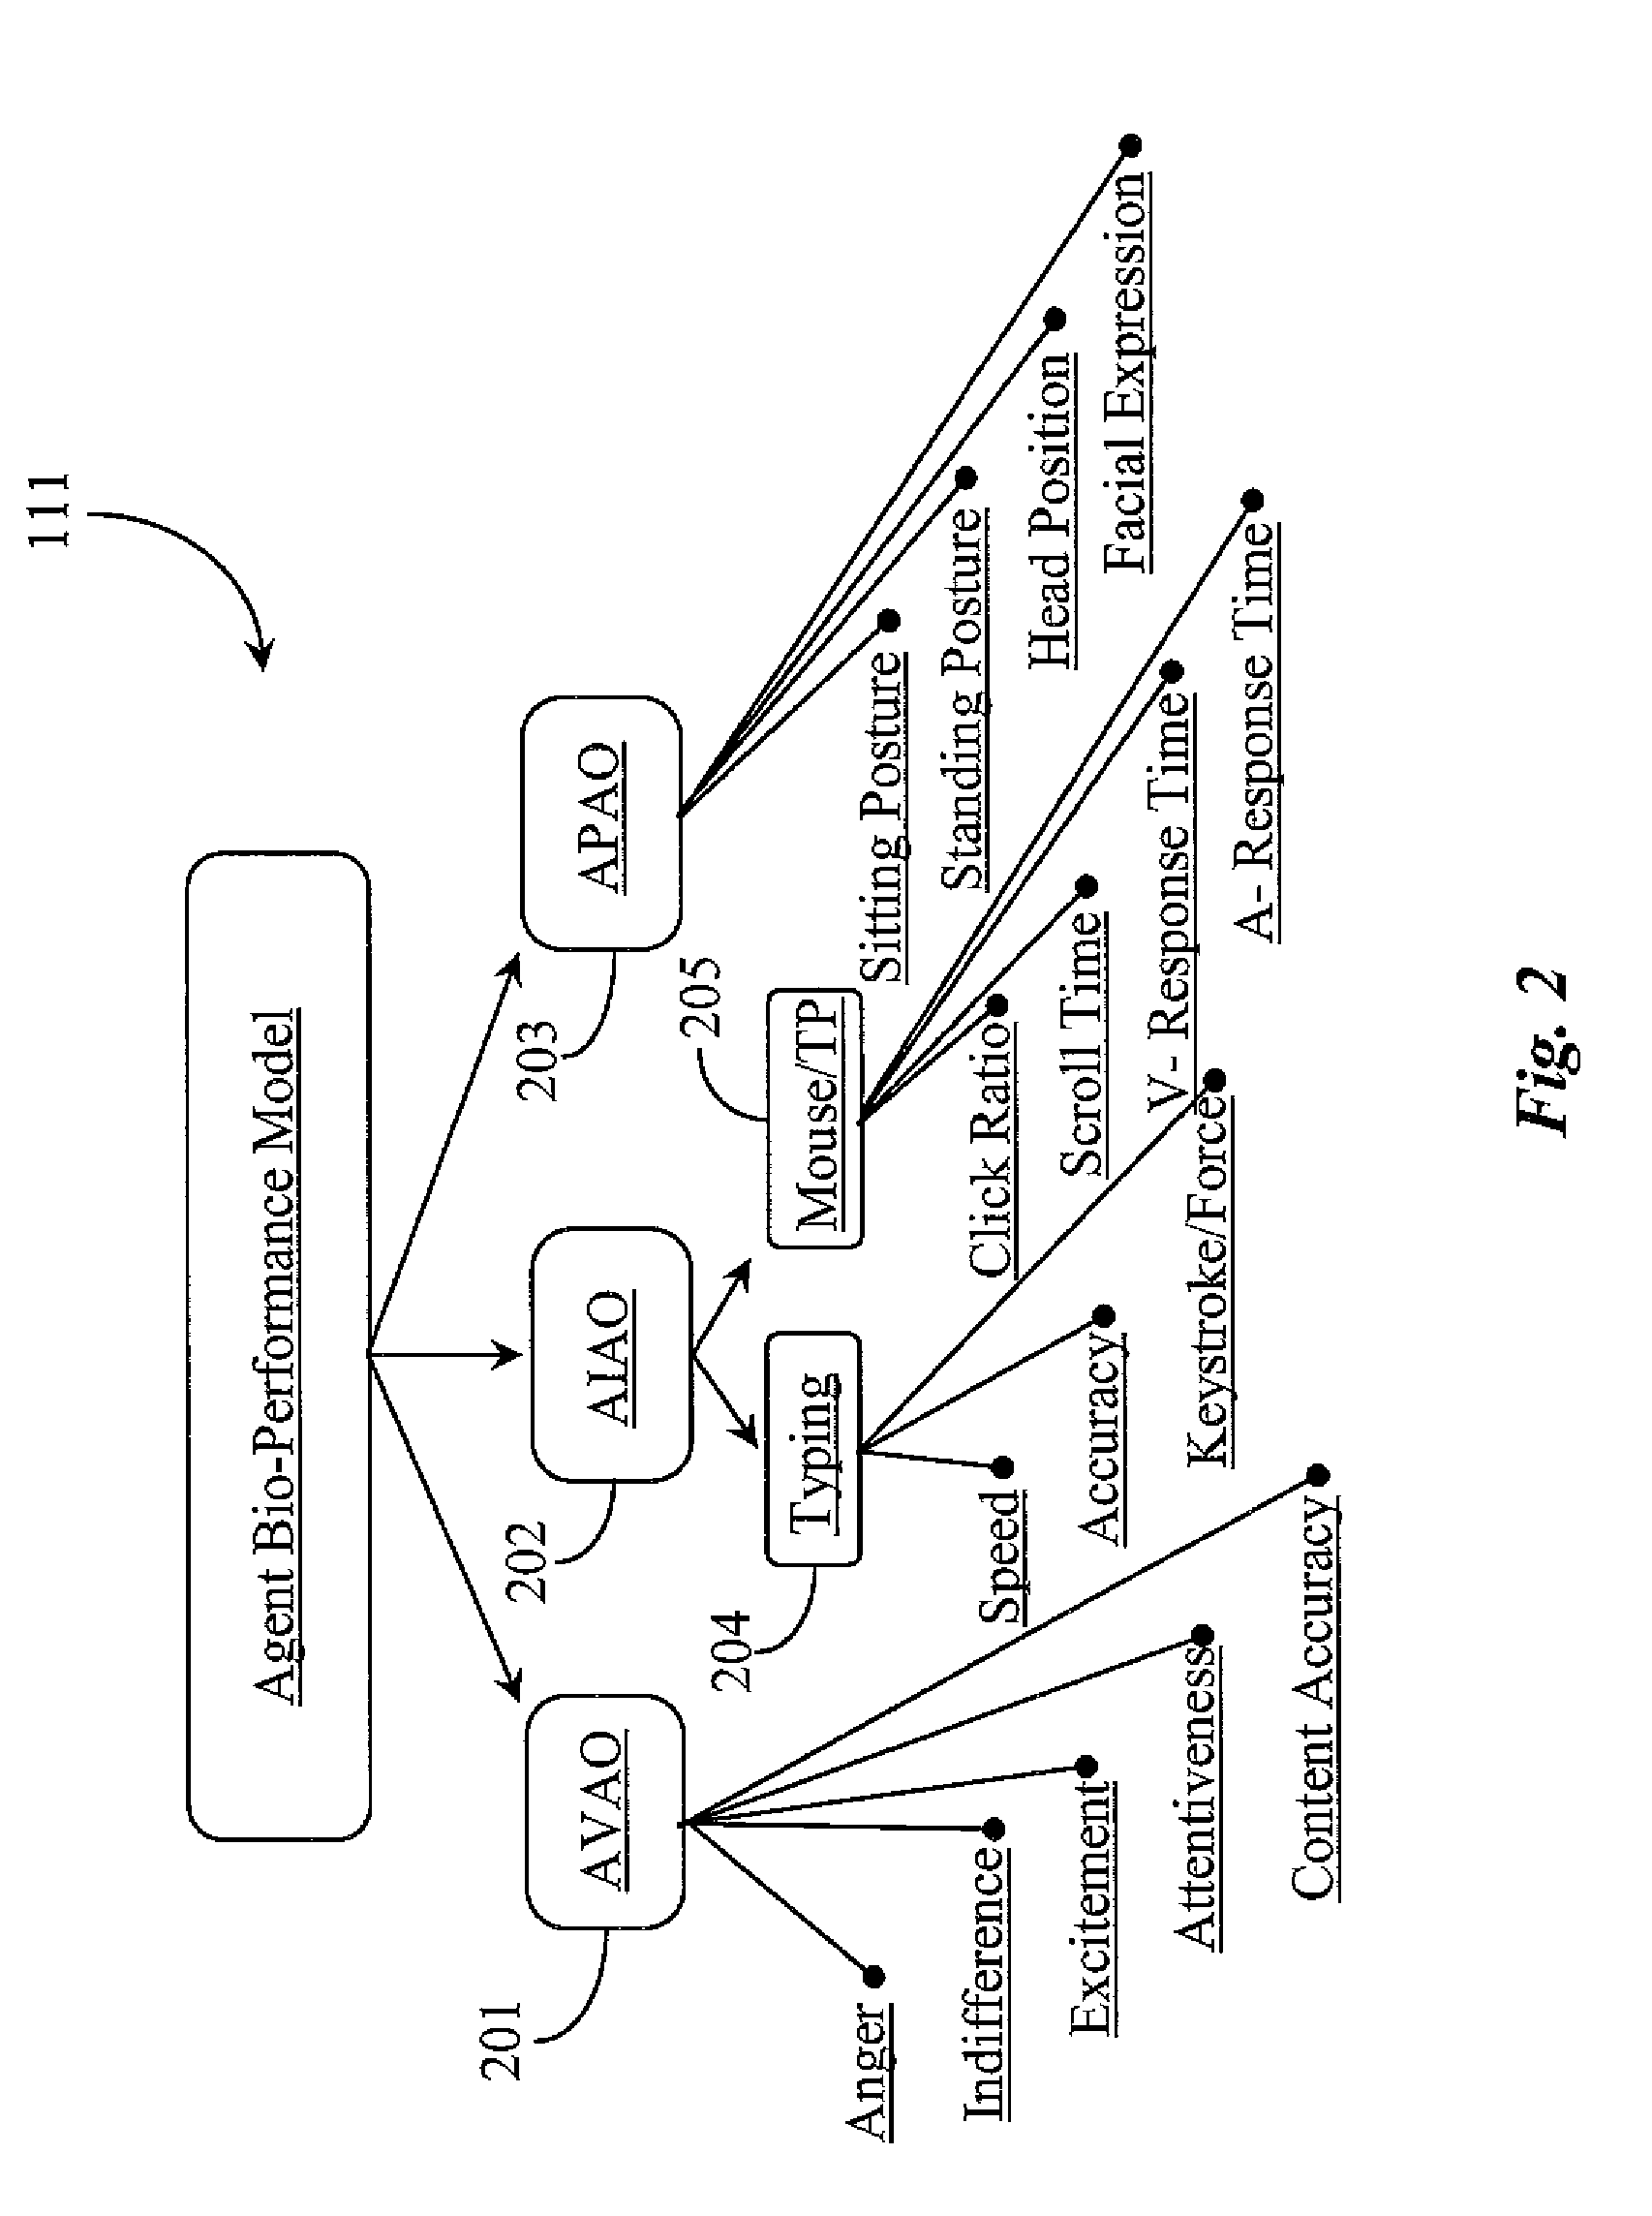 System for Routing Interactions Using Bio-Performance Attributes of Persons as Dynamic Input